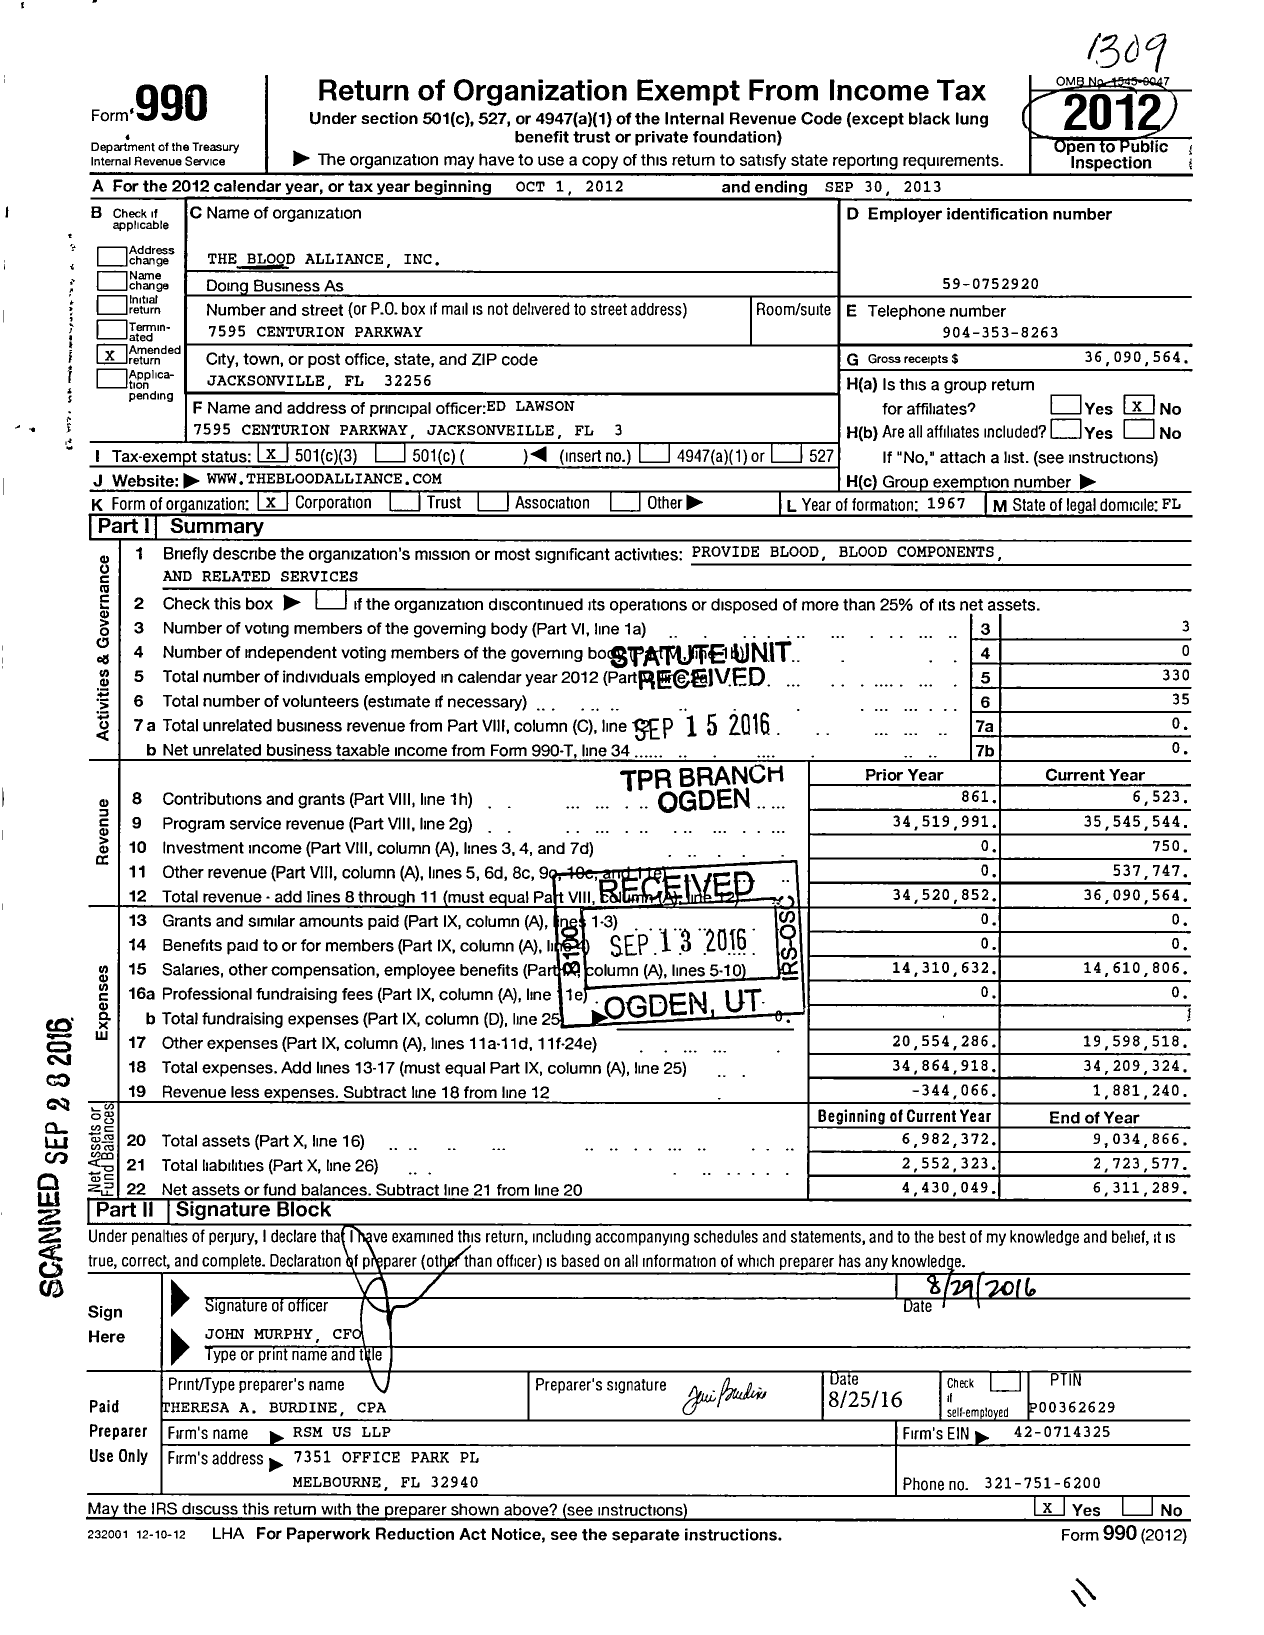 Image of first page of 2012 Form 990 for Jacksonville.com